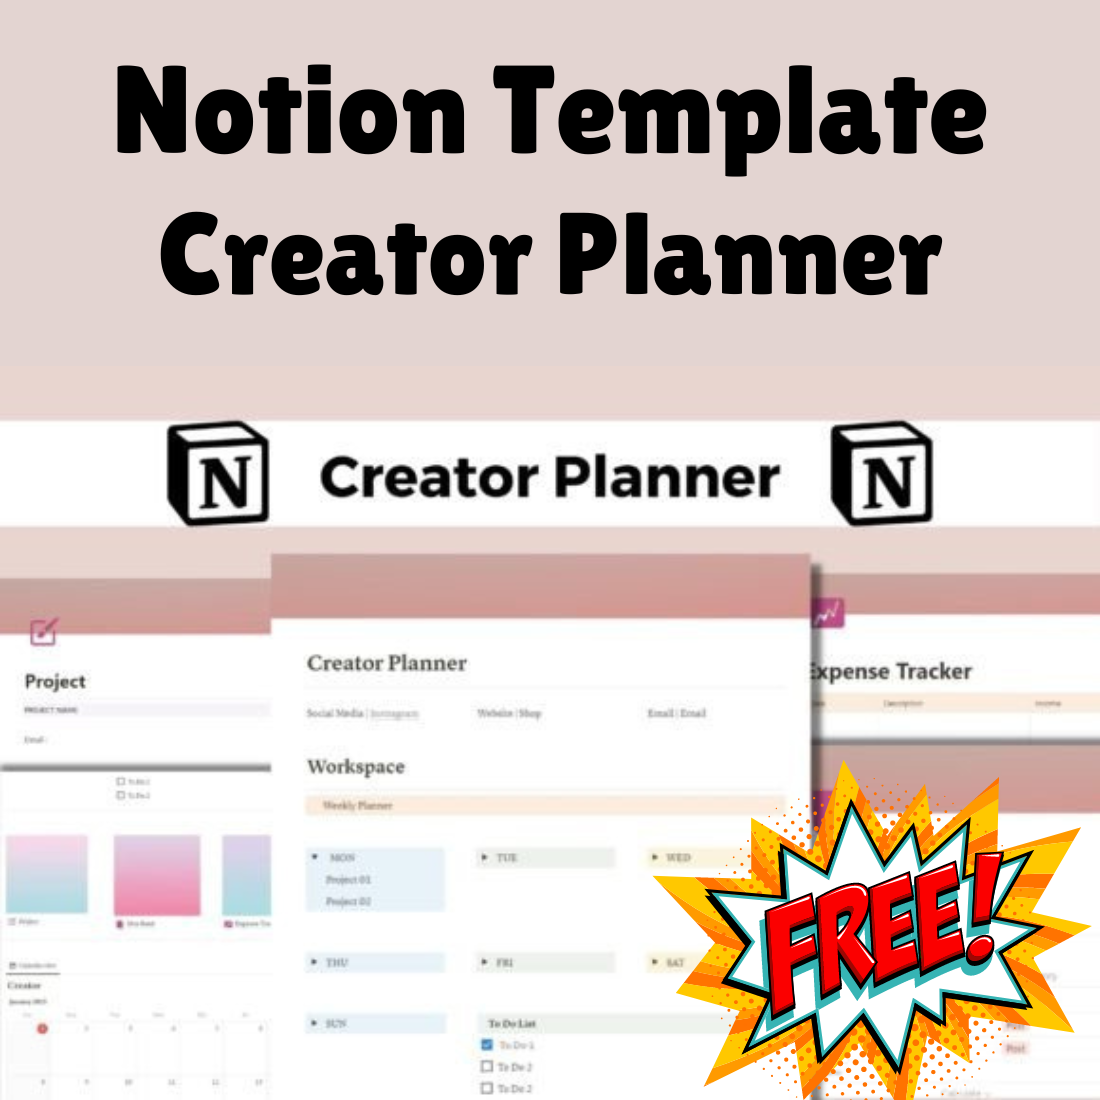 Creator Planner NOTION TEMPLATE cover image.